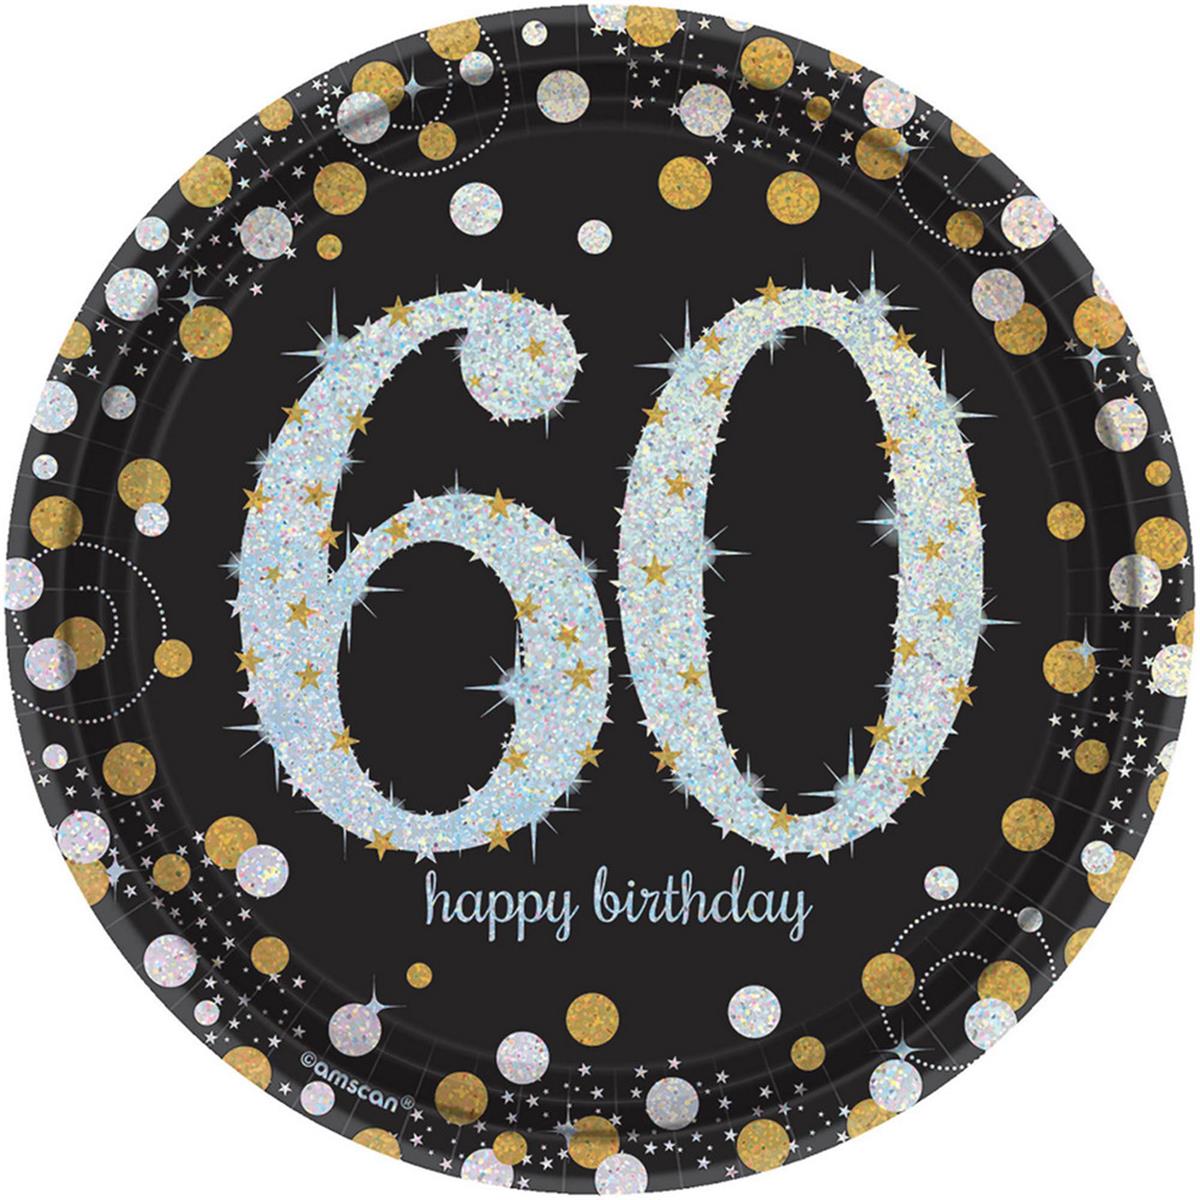 Picture of Amscan 269932 Sparkling 60th Celebration Plate 7 in. Dessert Plates - 8 Piece